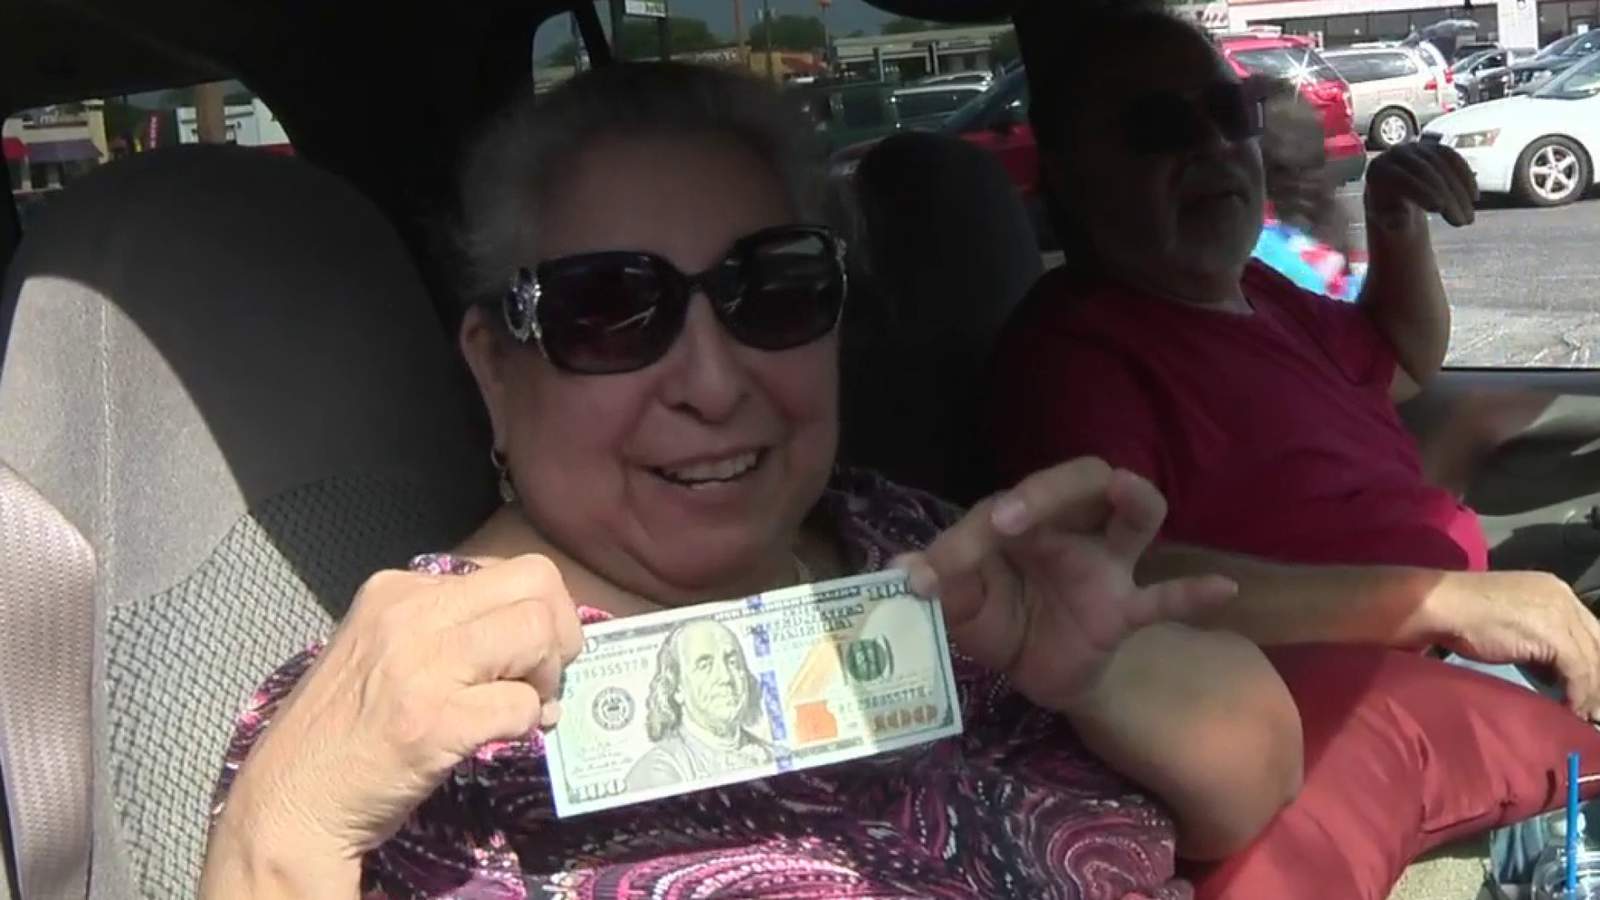 Seniors surprised with $100 during food giveaway